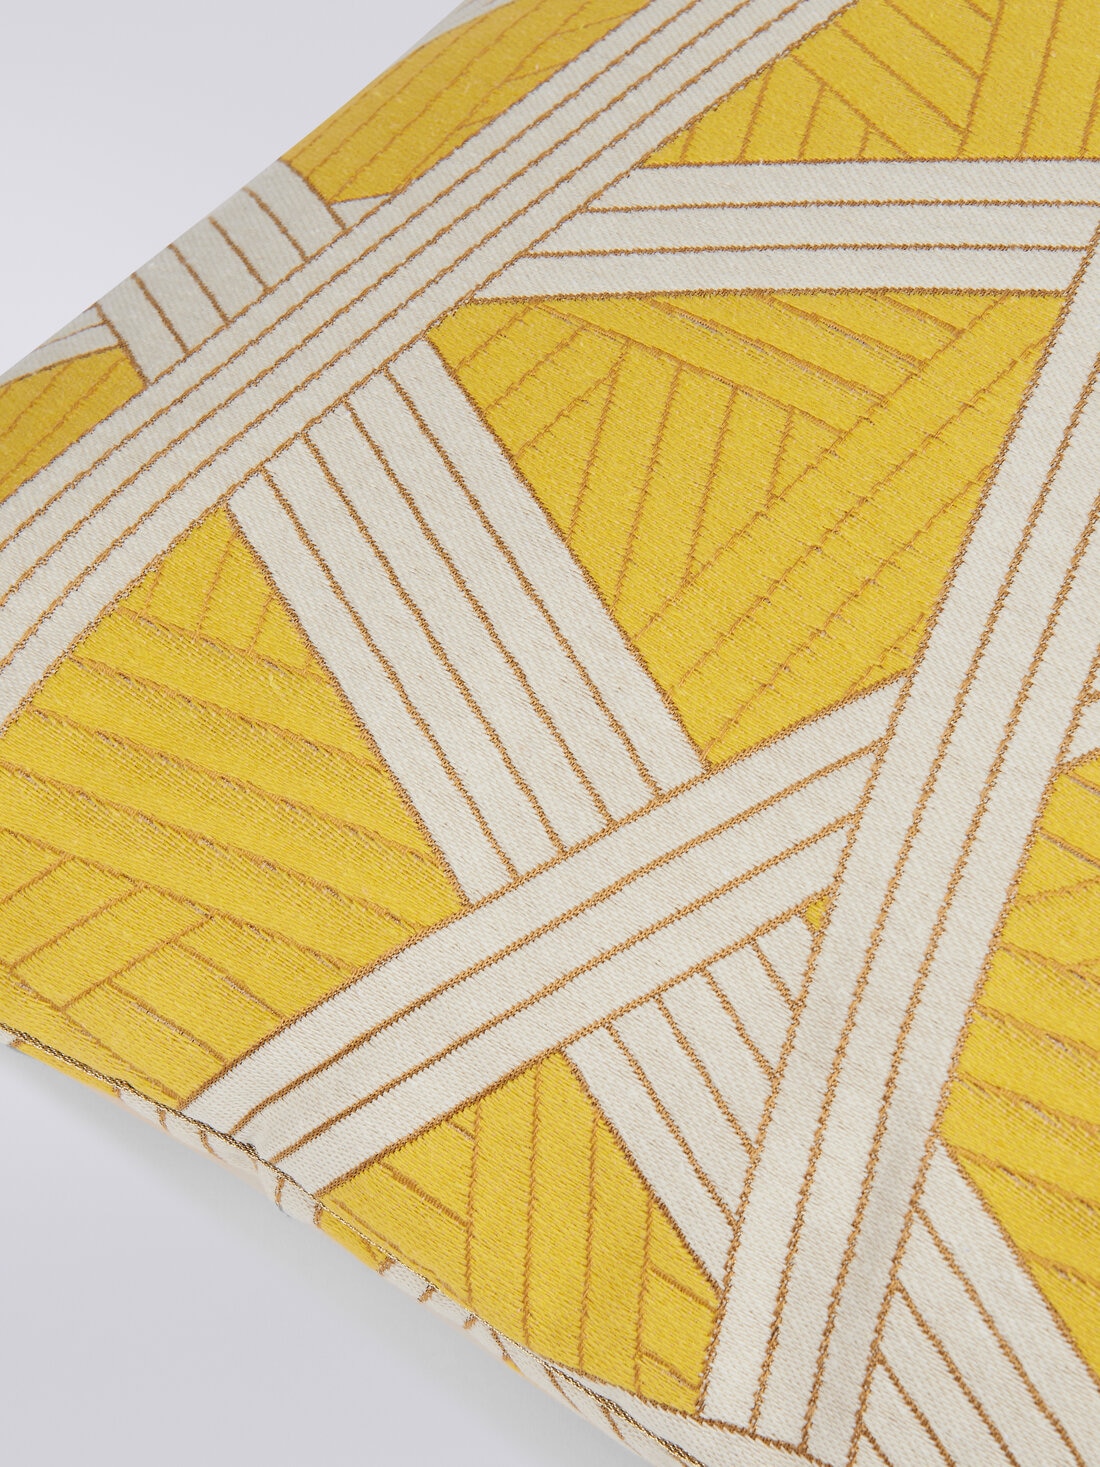 Nastri cushion 60x60 cm with contrasting stitching, Yellow  - 8051575837722 - 2